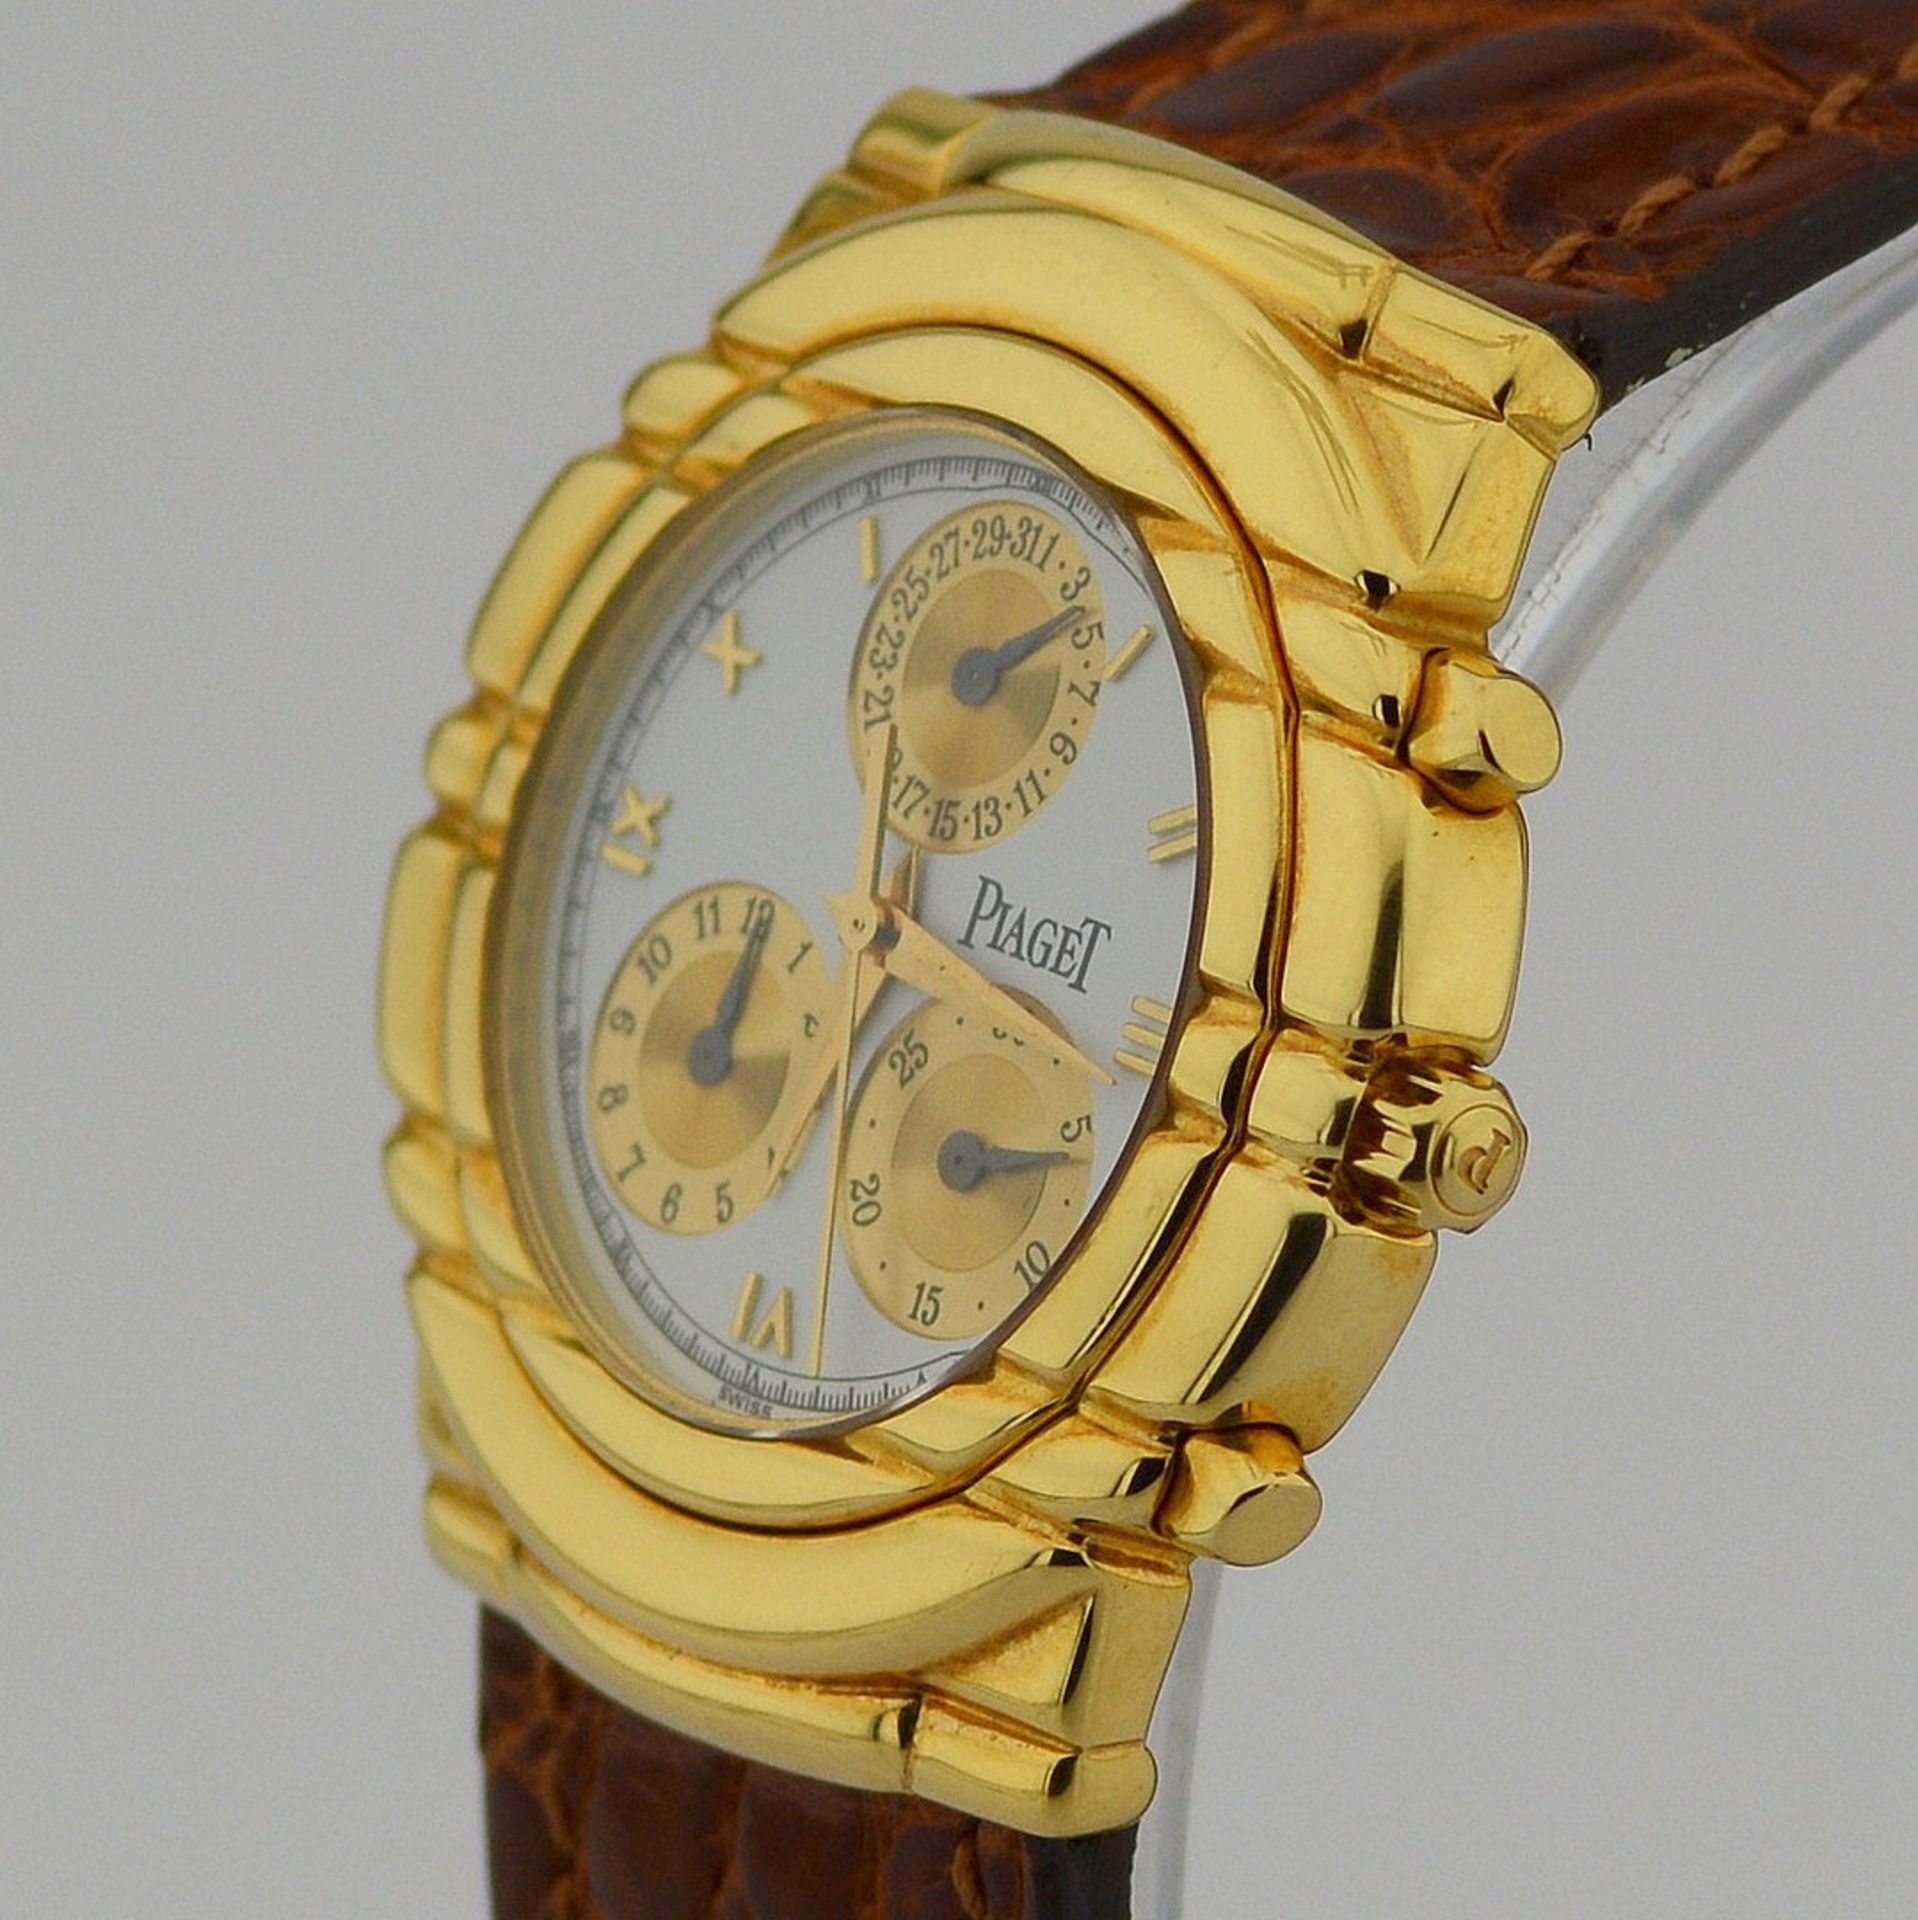 Piaget / Tanagra Chronograph - Lady's Yellow Gold Wristwatch - Image 12 of 15